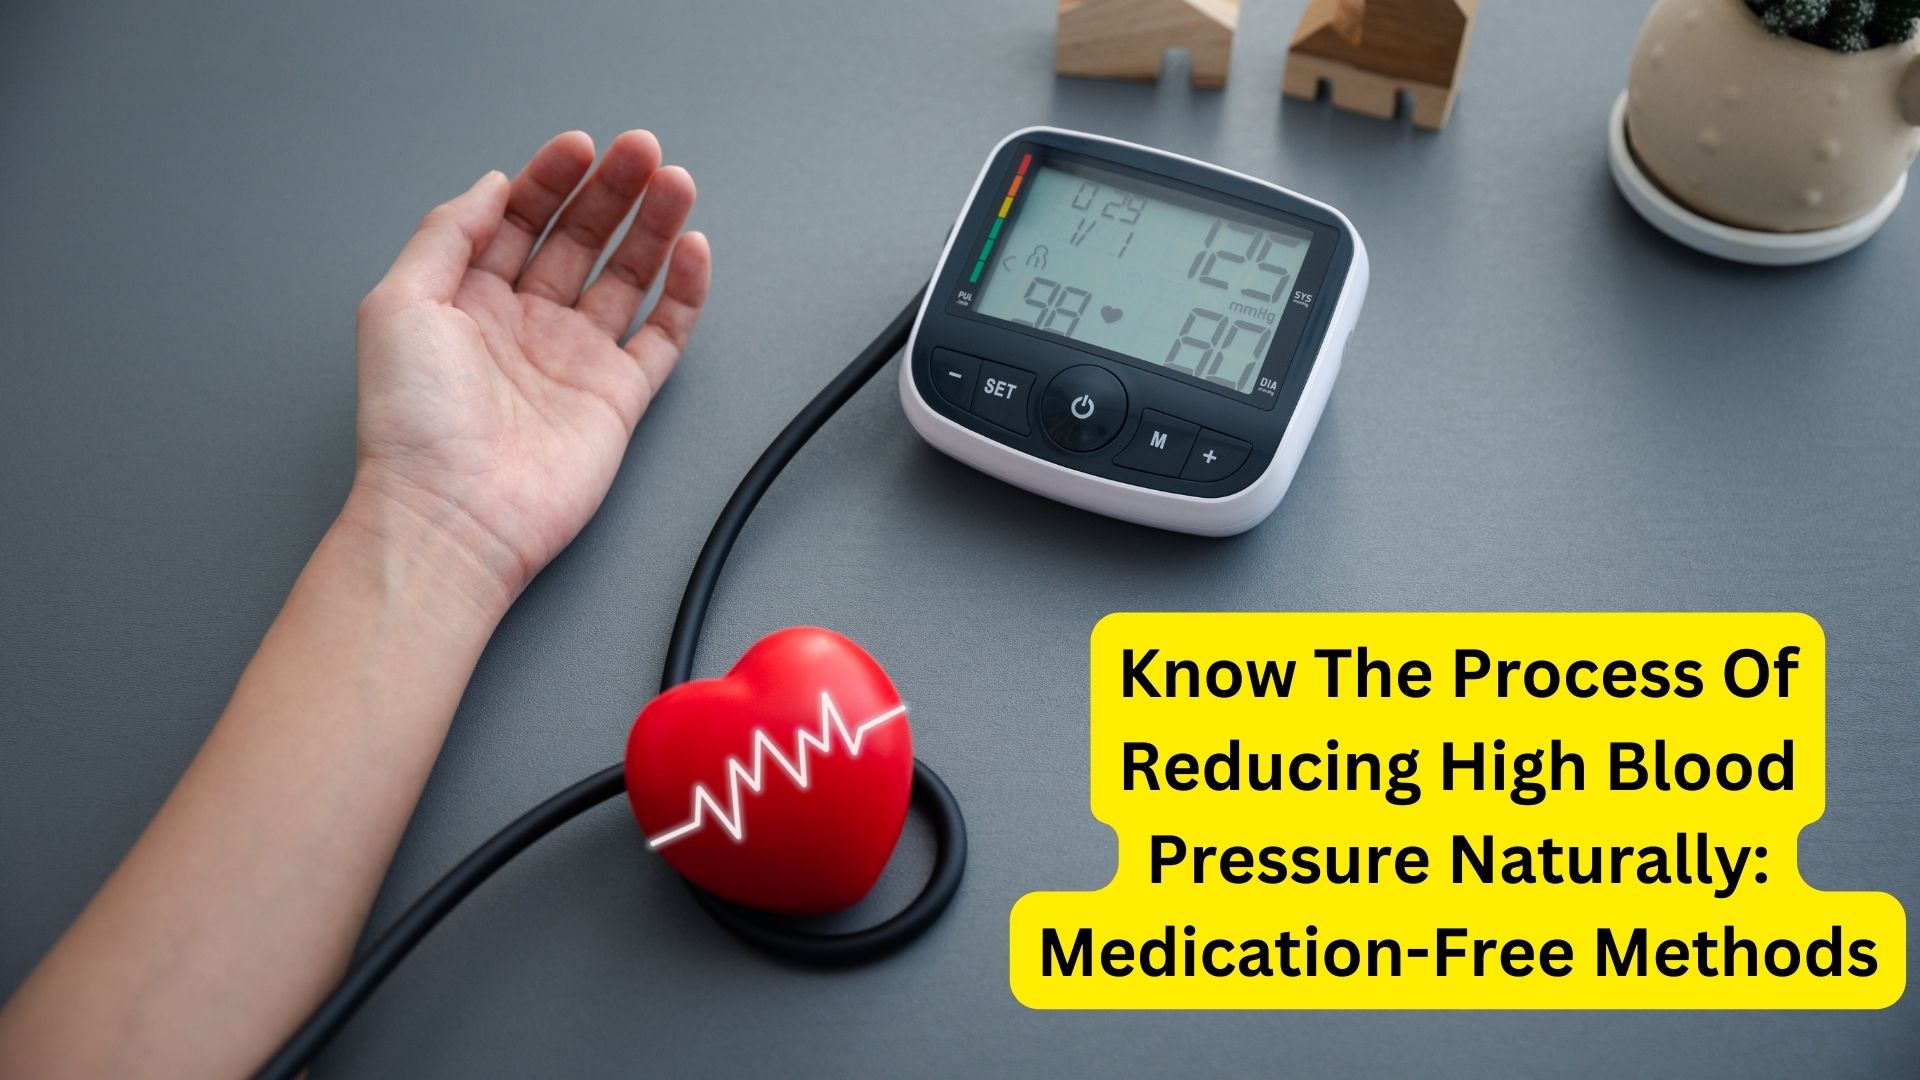 Know The Process Of Reducing High Blood Pressure Naturally: Medication-Free Methods